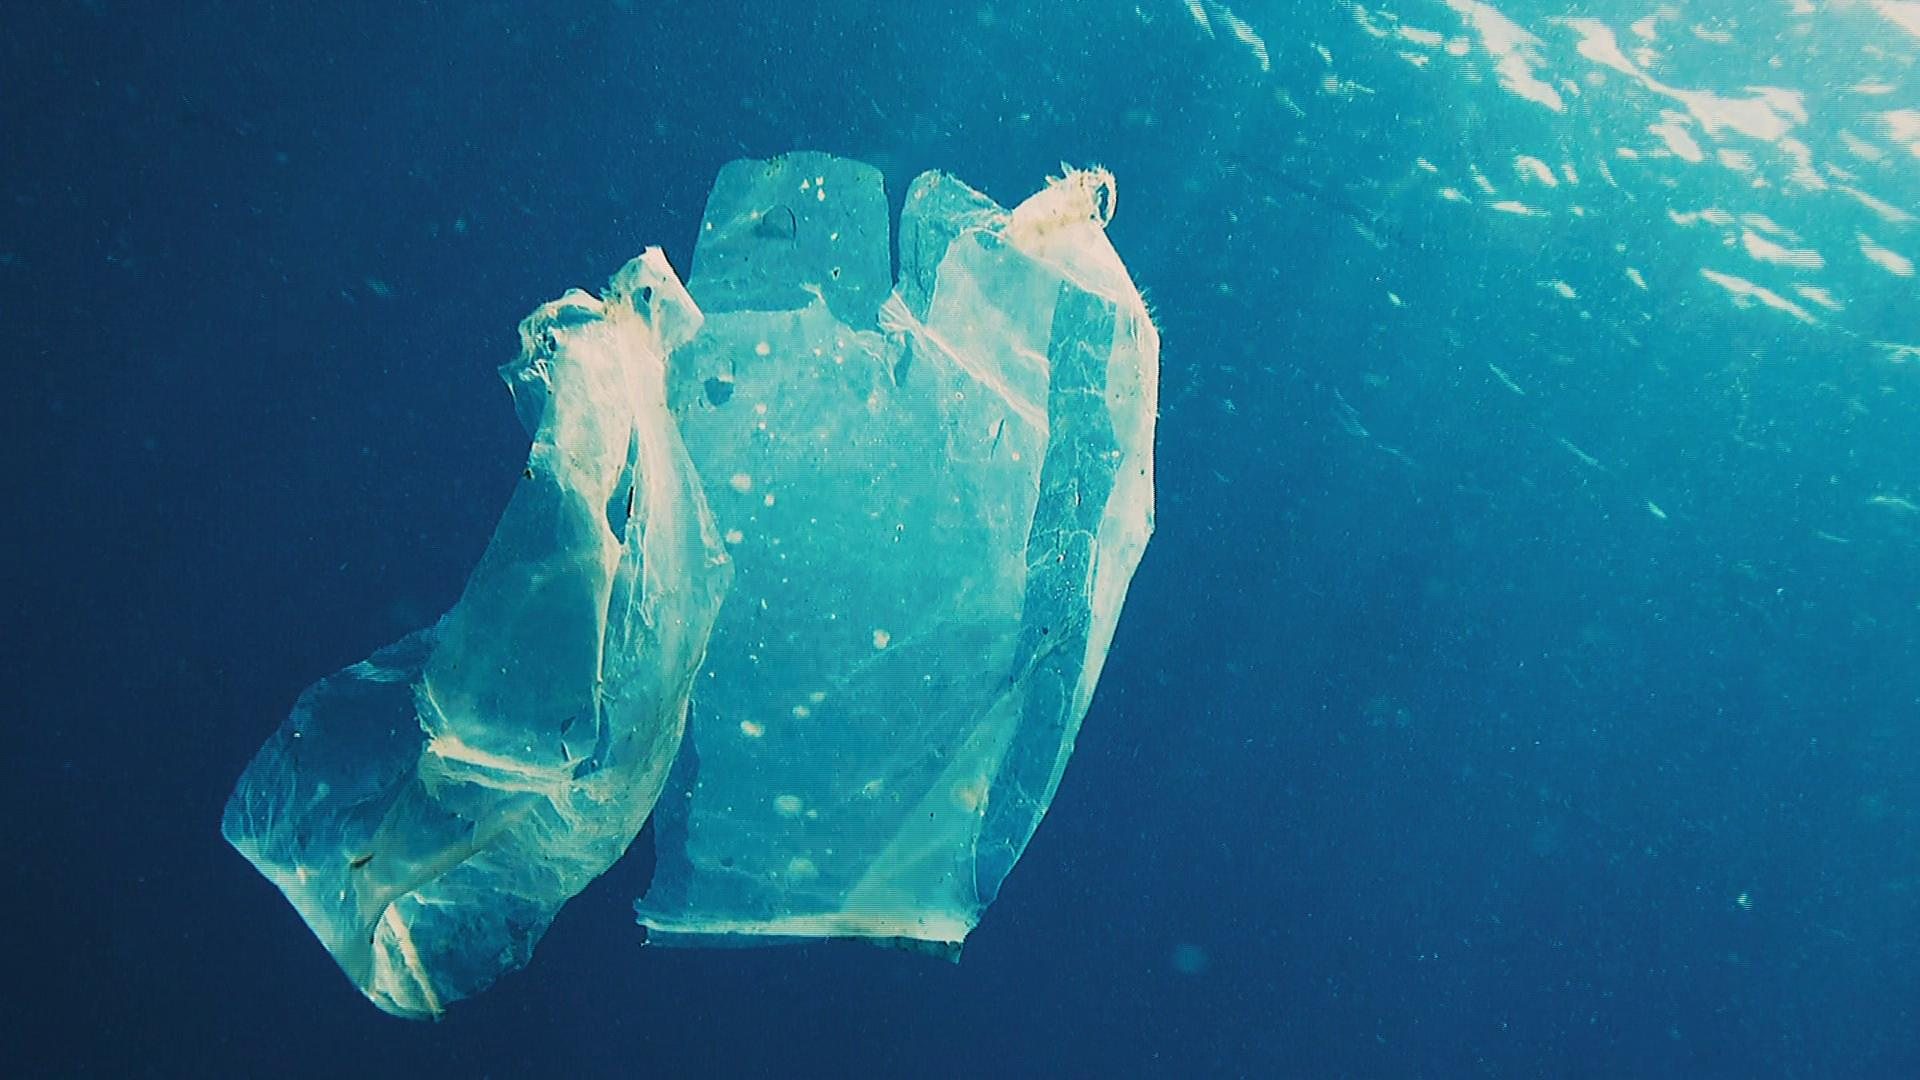 Why paper bags are worse for the planet than plastic